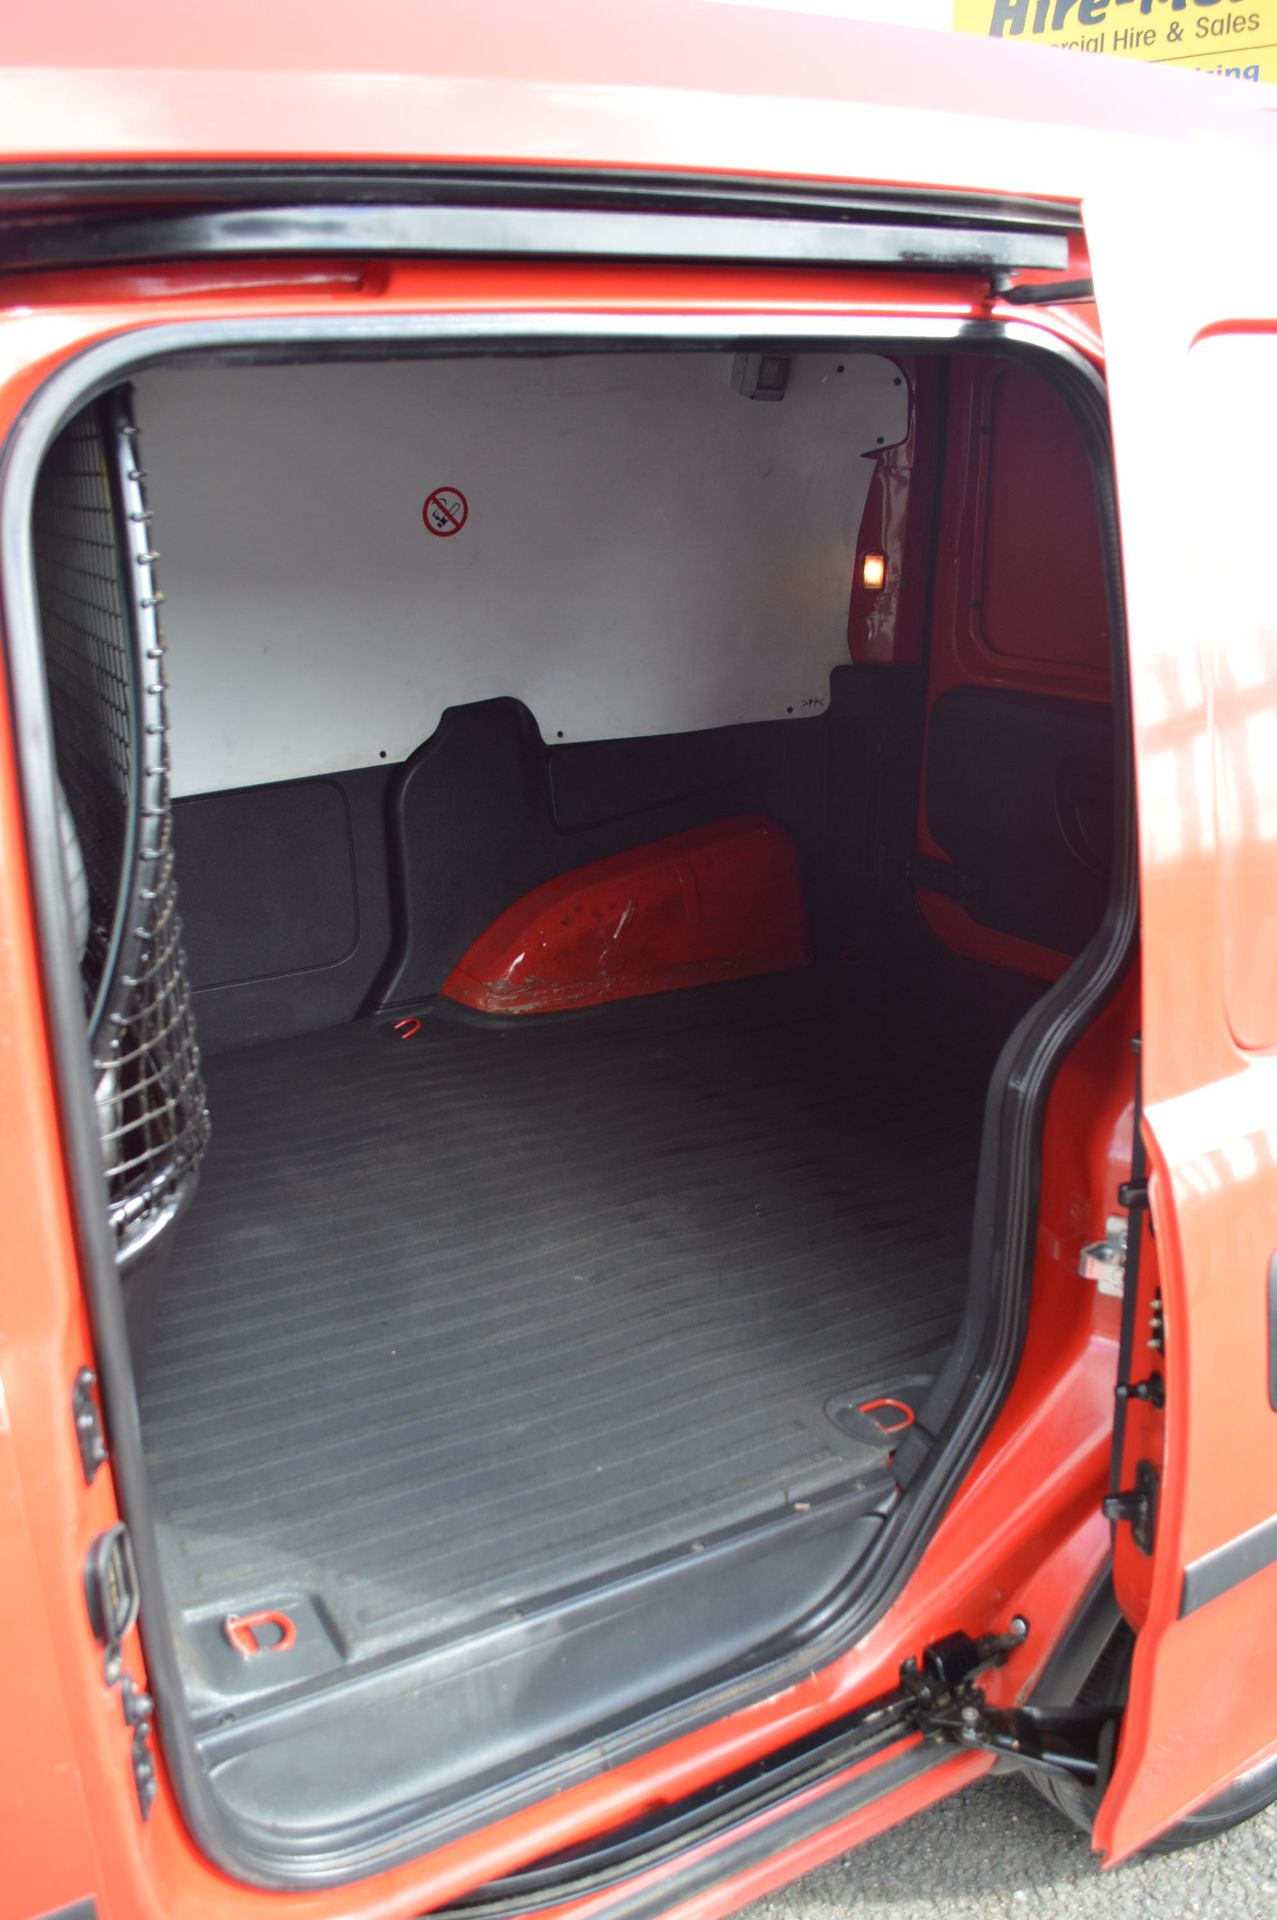 2008/08 REG VAUXHALL COMBO 1700 CDTI - ROYAL MAIL OWNED, 1 OWNER FROM NEW! *NO VAT* - Image 8 of 21